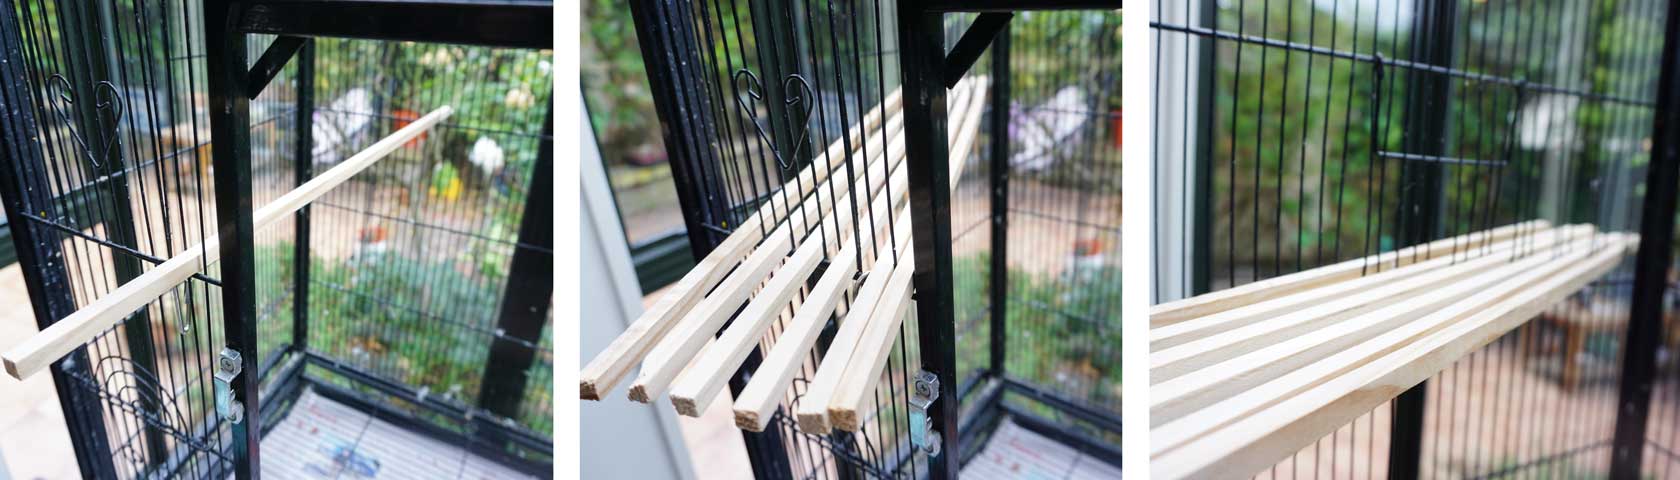 Wooden pieces secured between cage bars